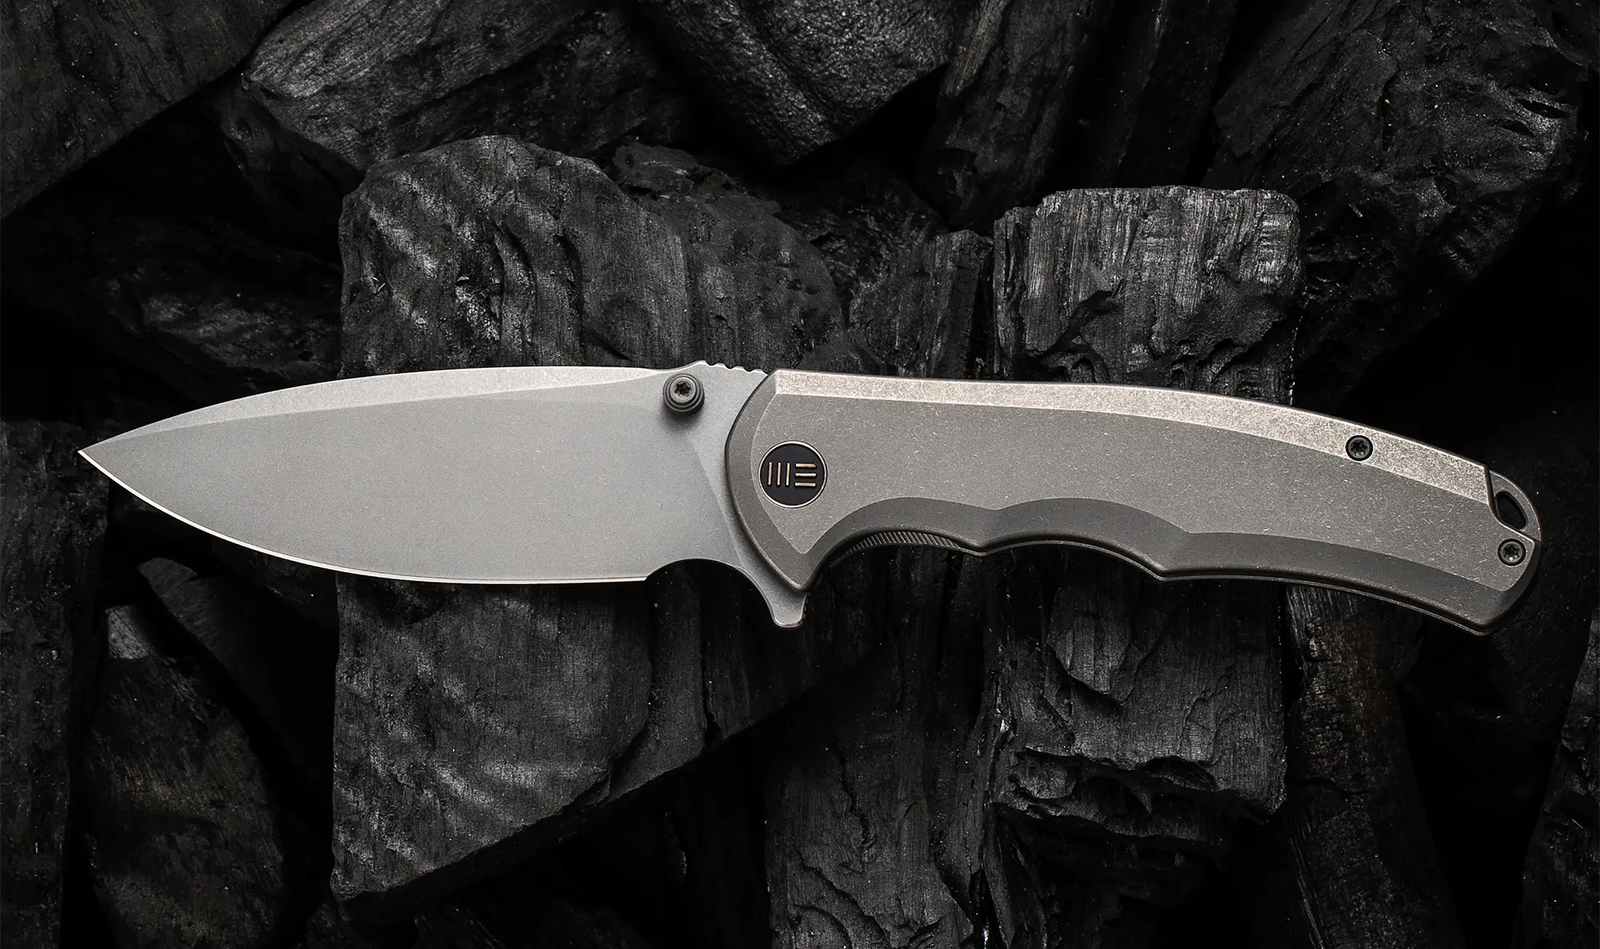 WE knife Praxis S35VN Titanium Frame Lock with dual thumb studs